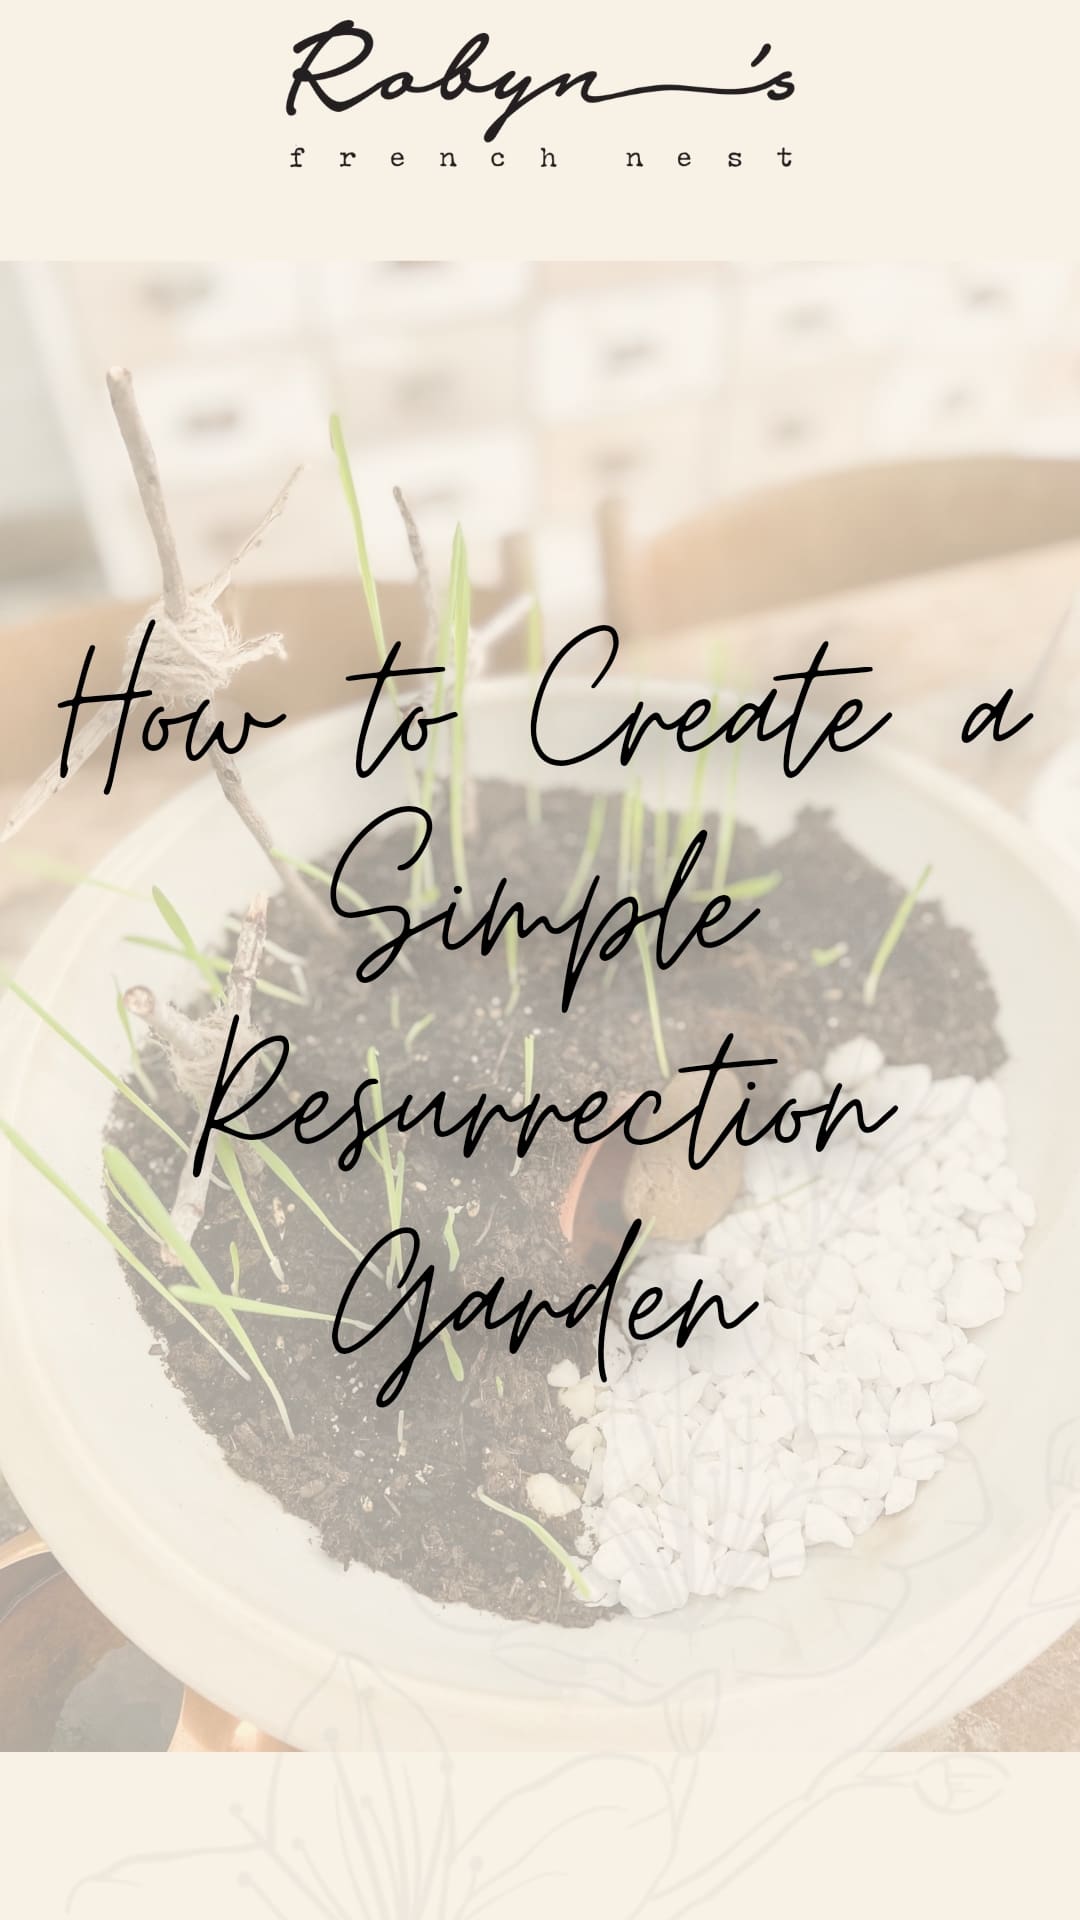 How to Make a Beautiful Resurrection Garden Centerpiece for Easter